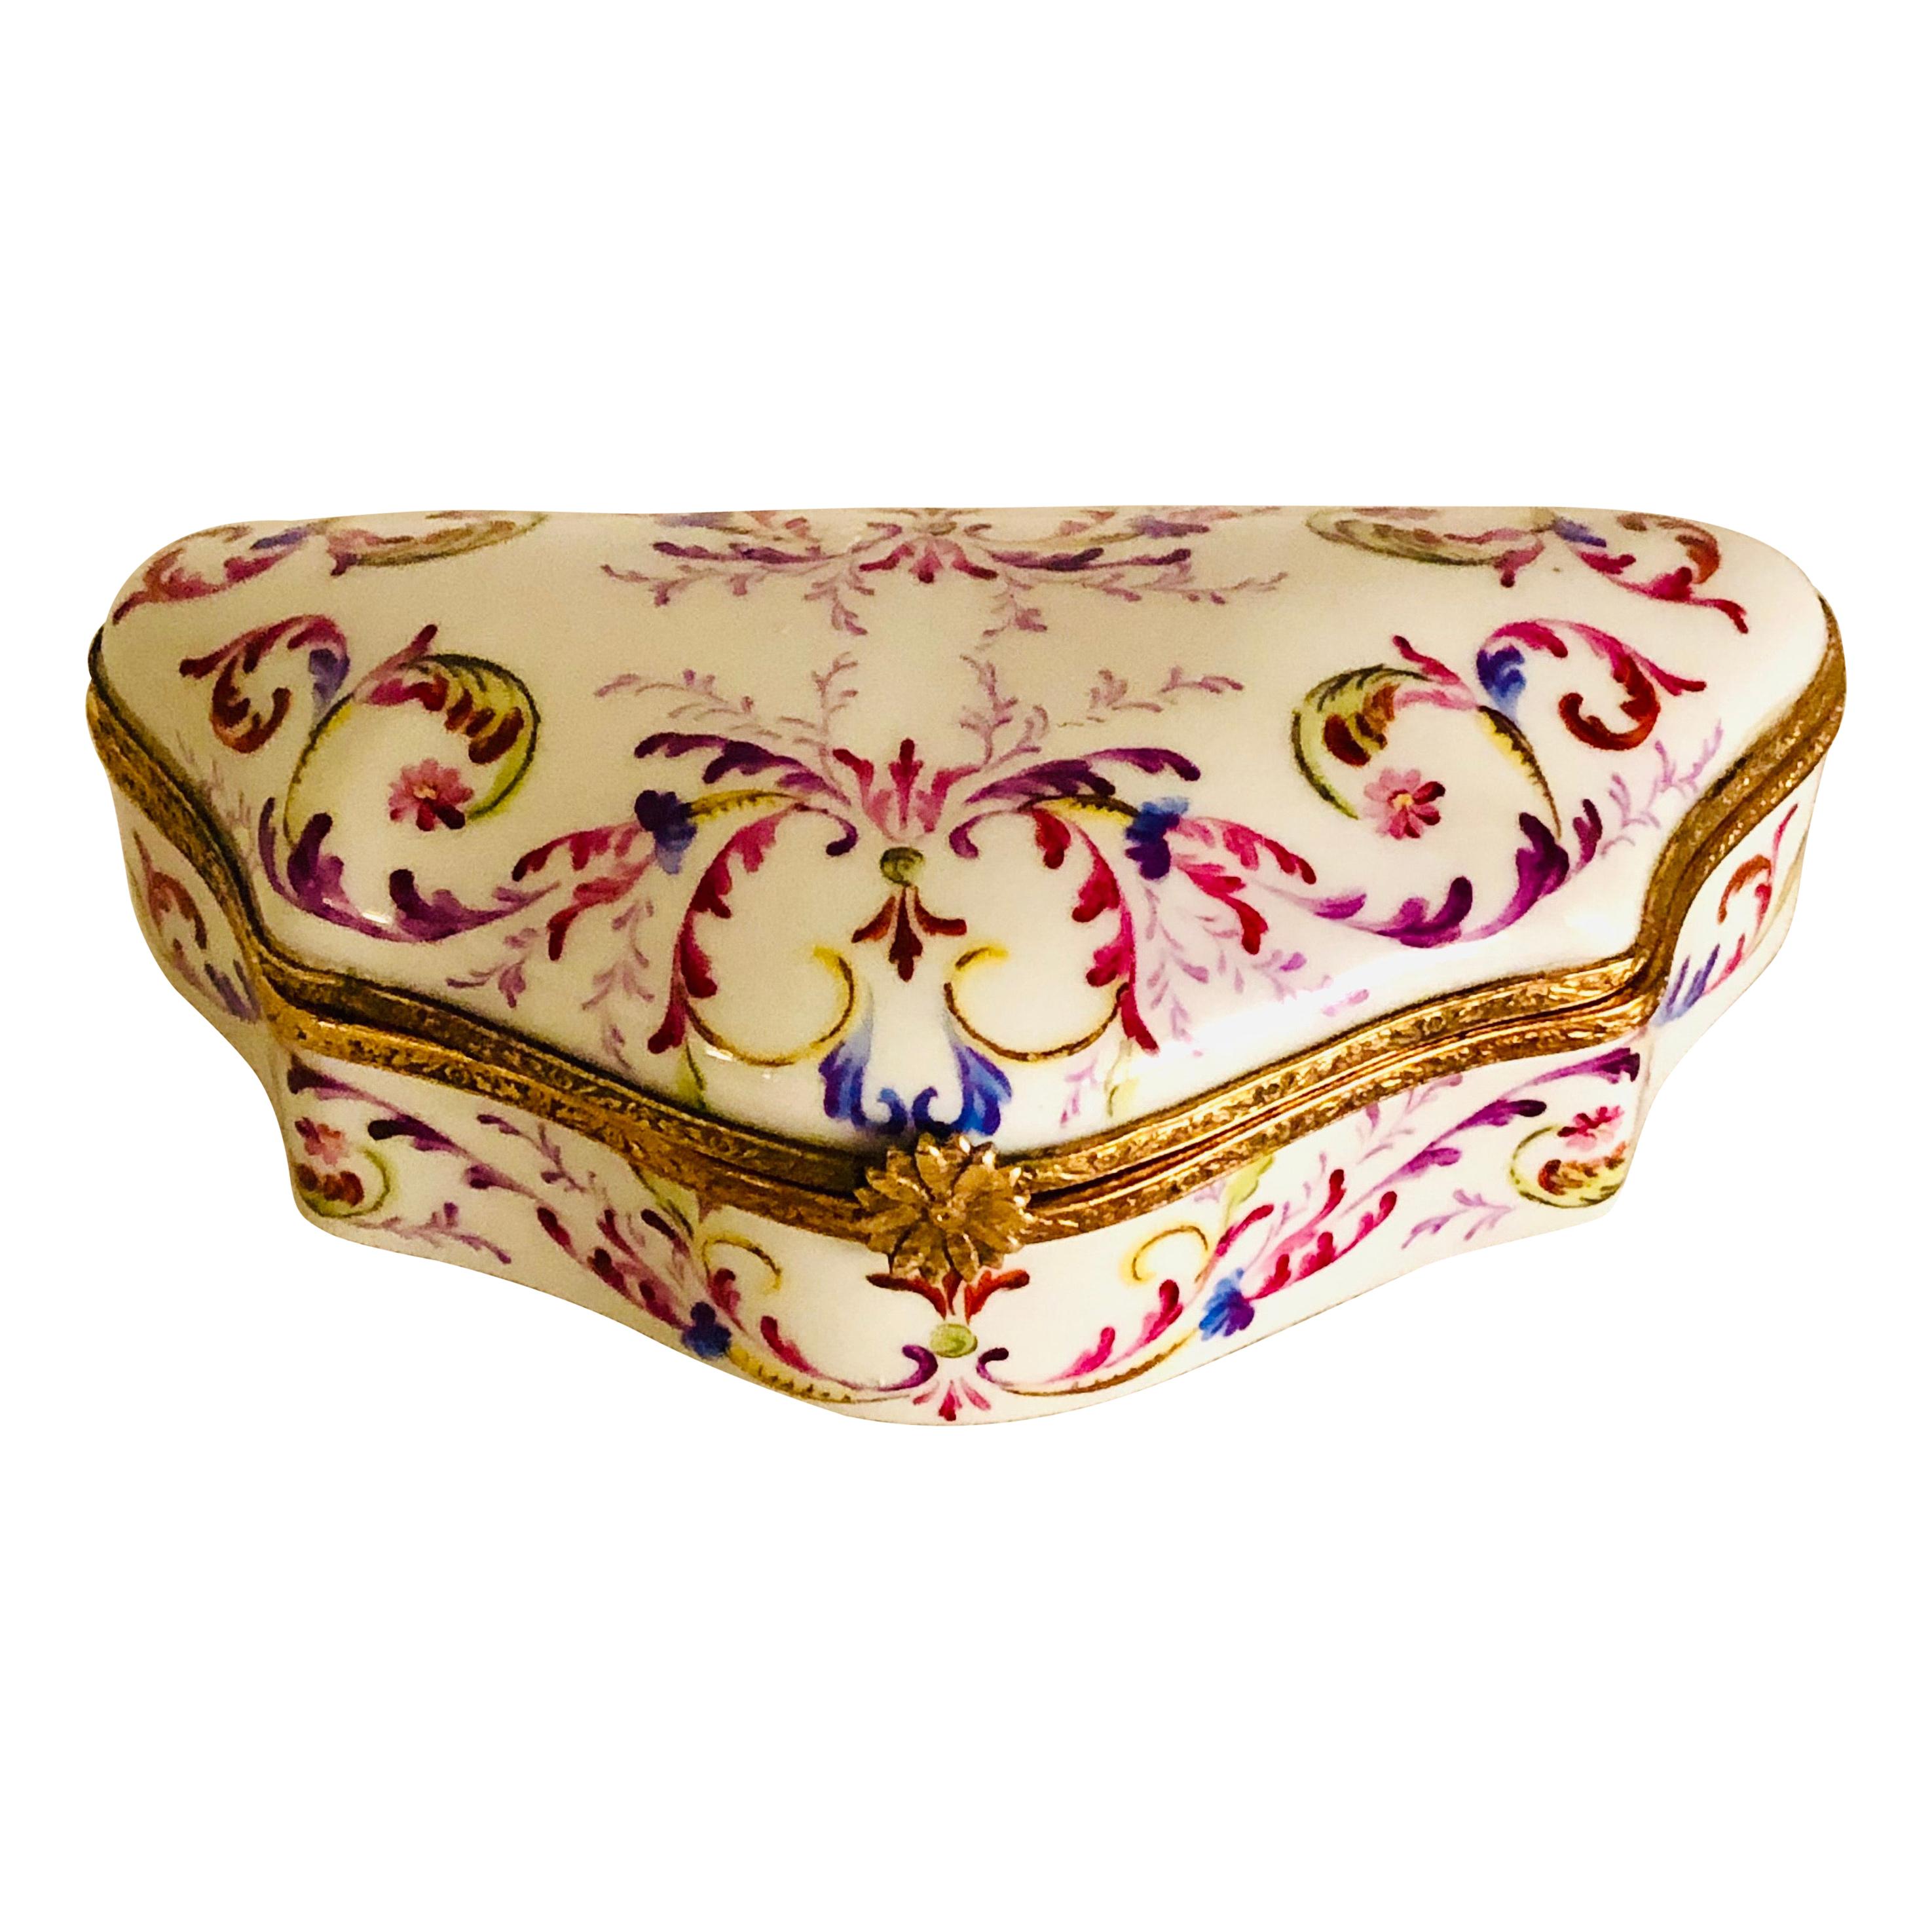 Le Tallec Porcelain Box Painted with Elaborate Design of Many Colors and Flowers